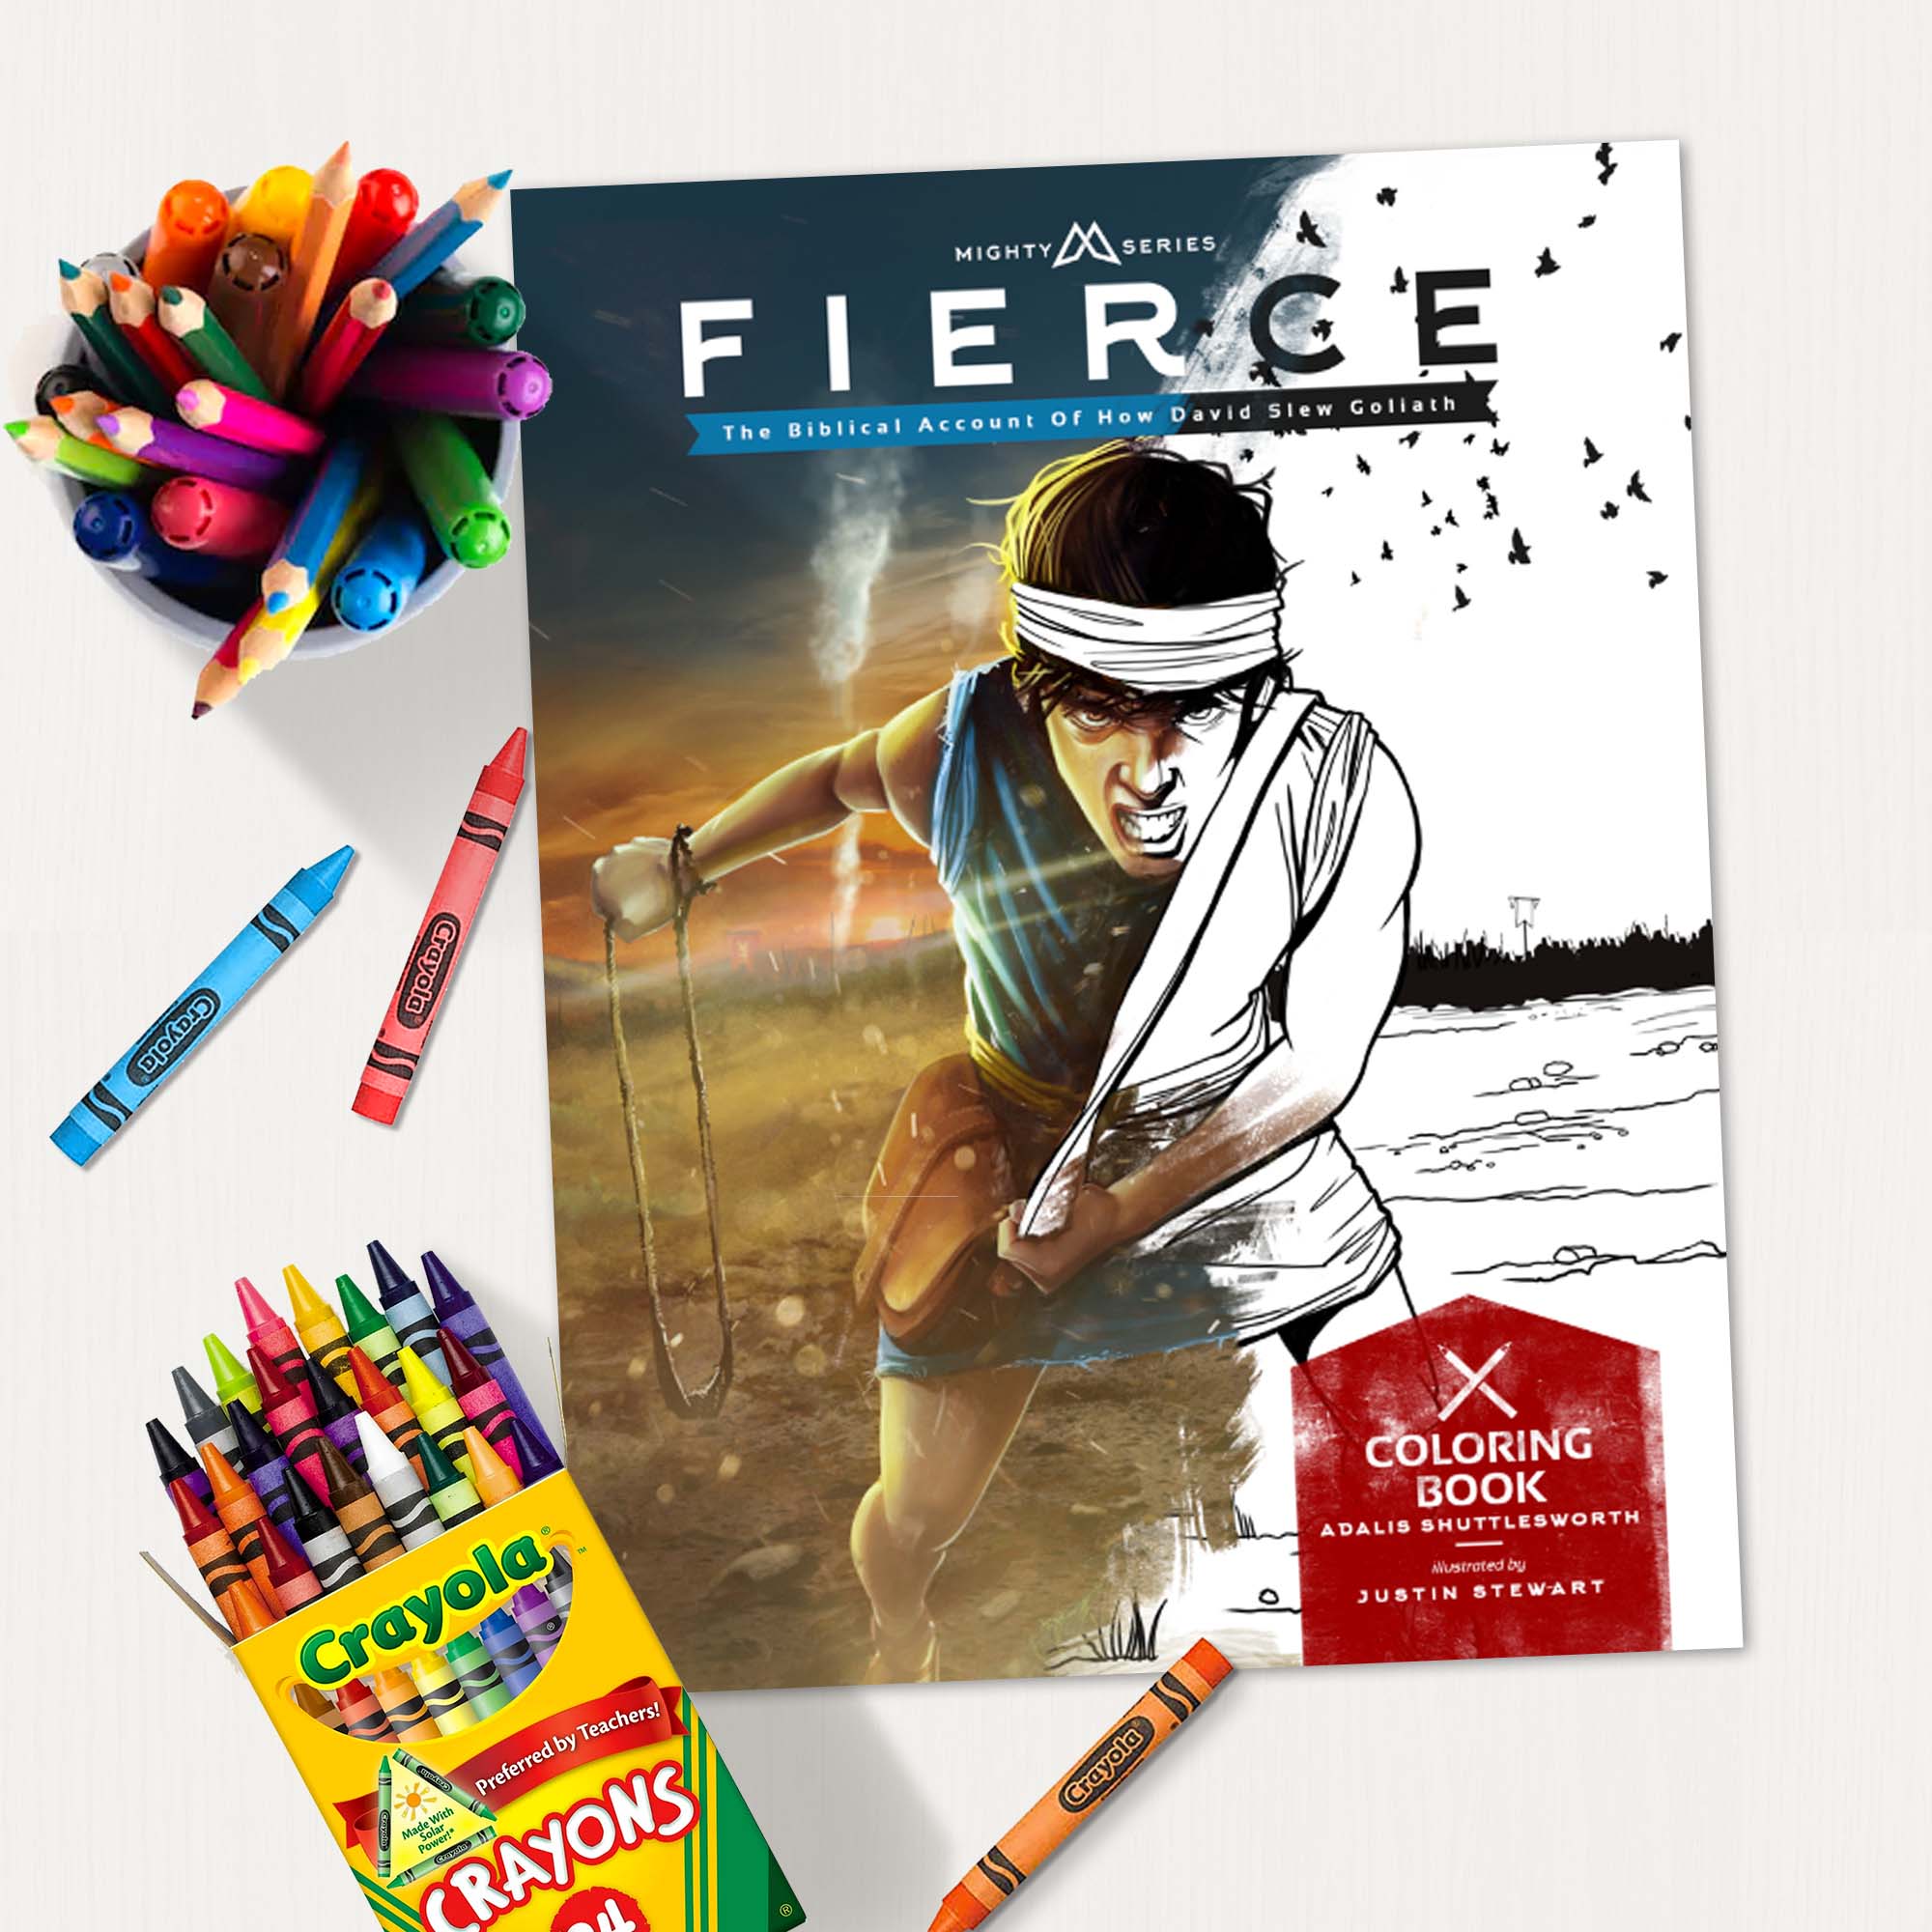 Download FIERCE COLORING BOOK - The Mighty Series